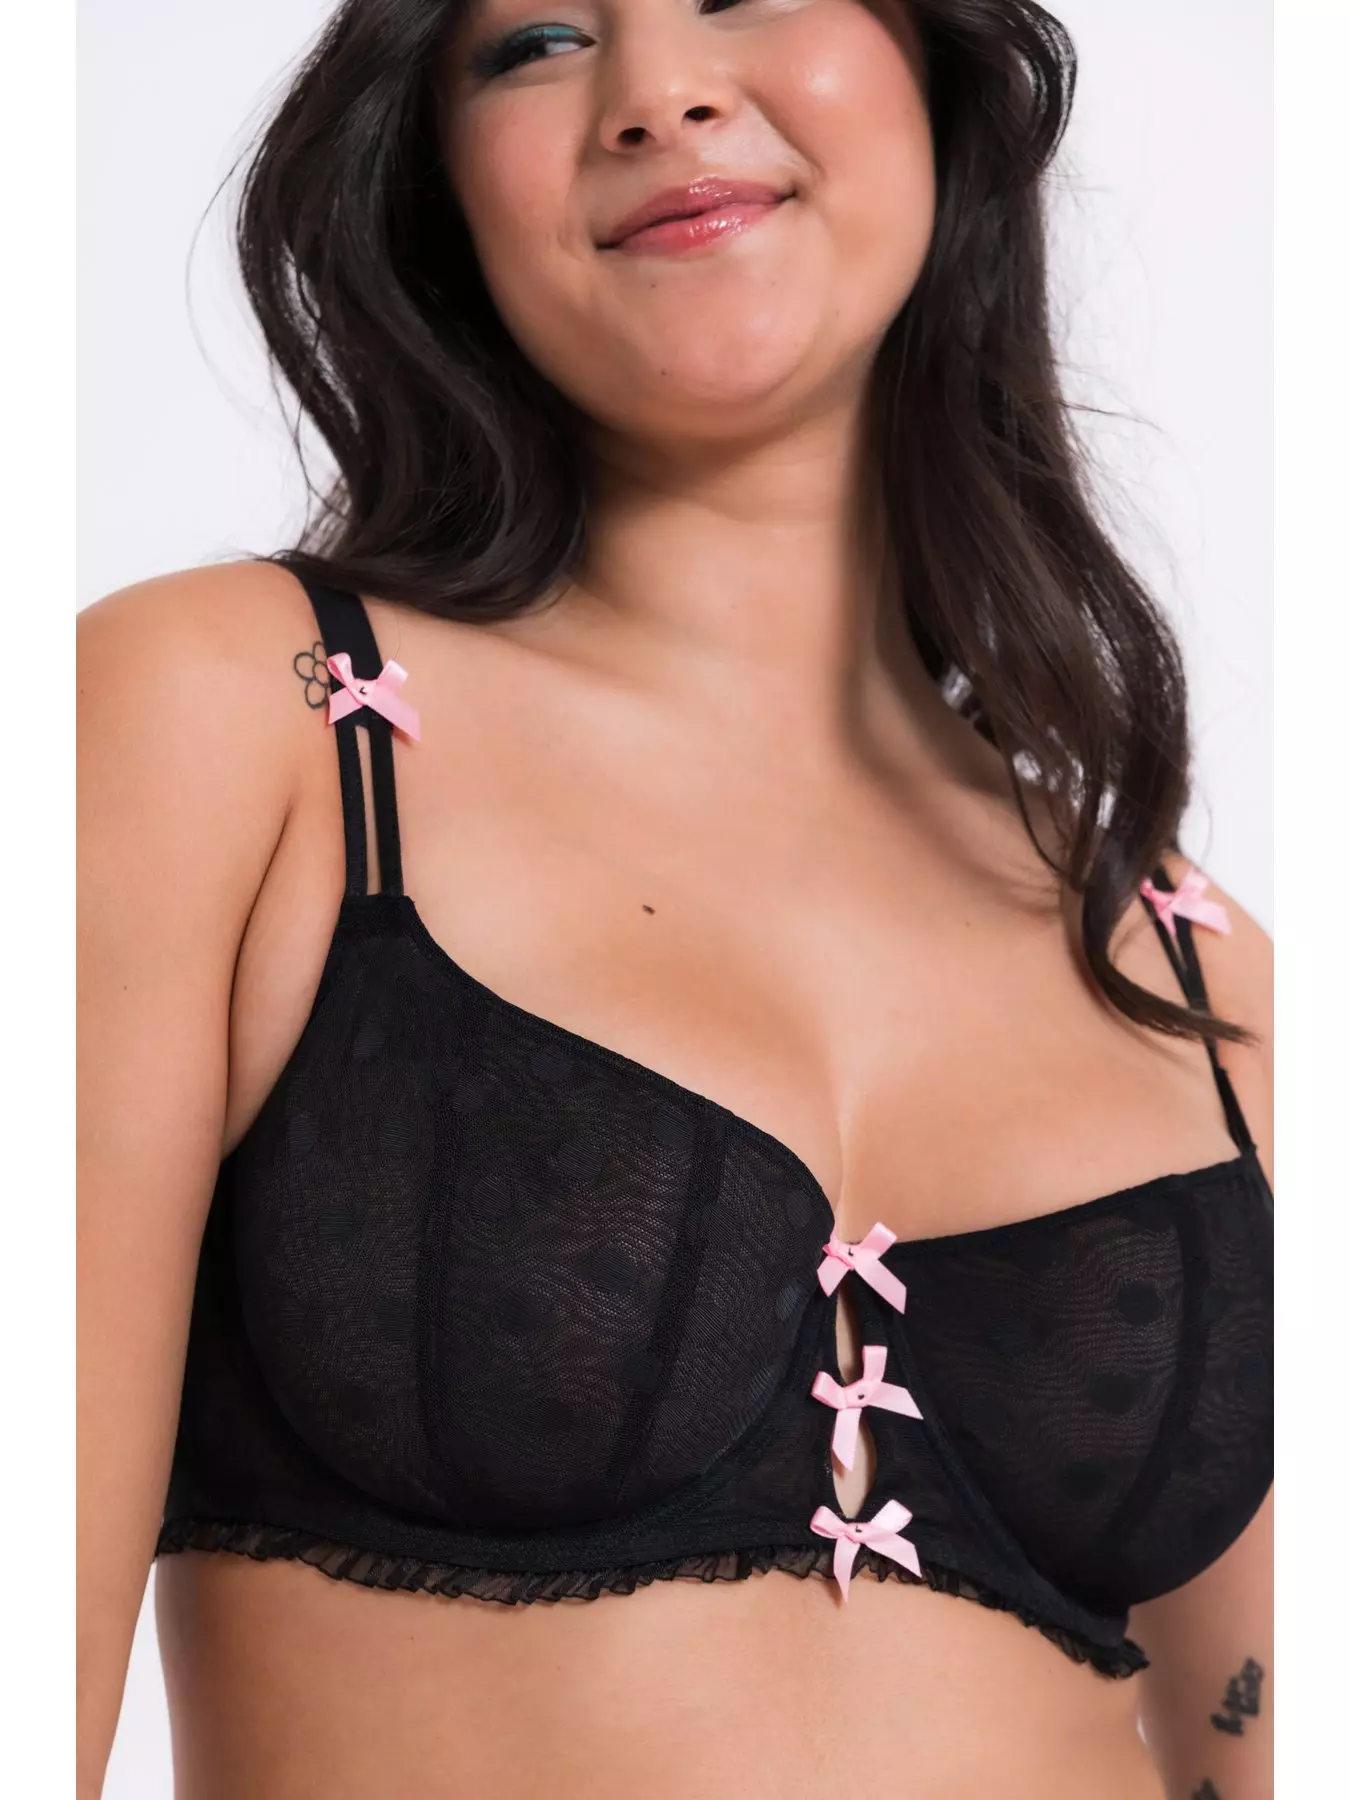 Too 'Heart' to handle 💕 Lingerie range in store now. @brasnthings Size  range 8-18 & goes up to G cup in most underband sizes.